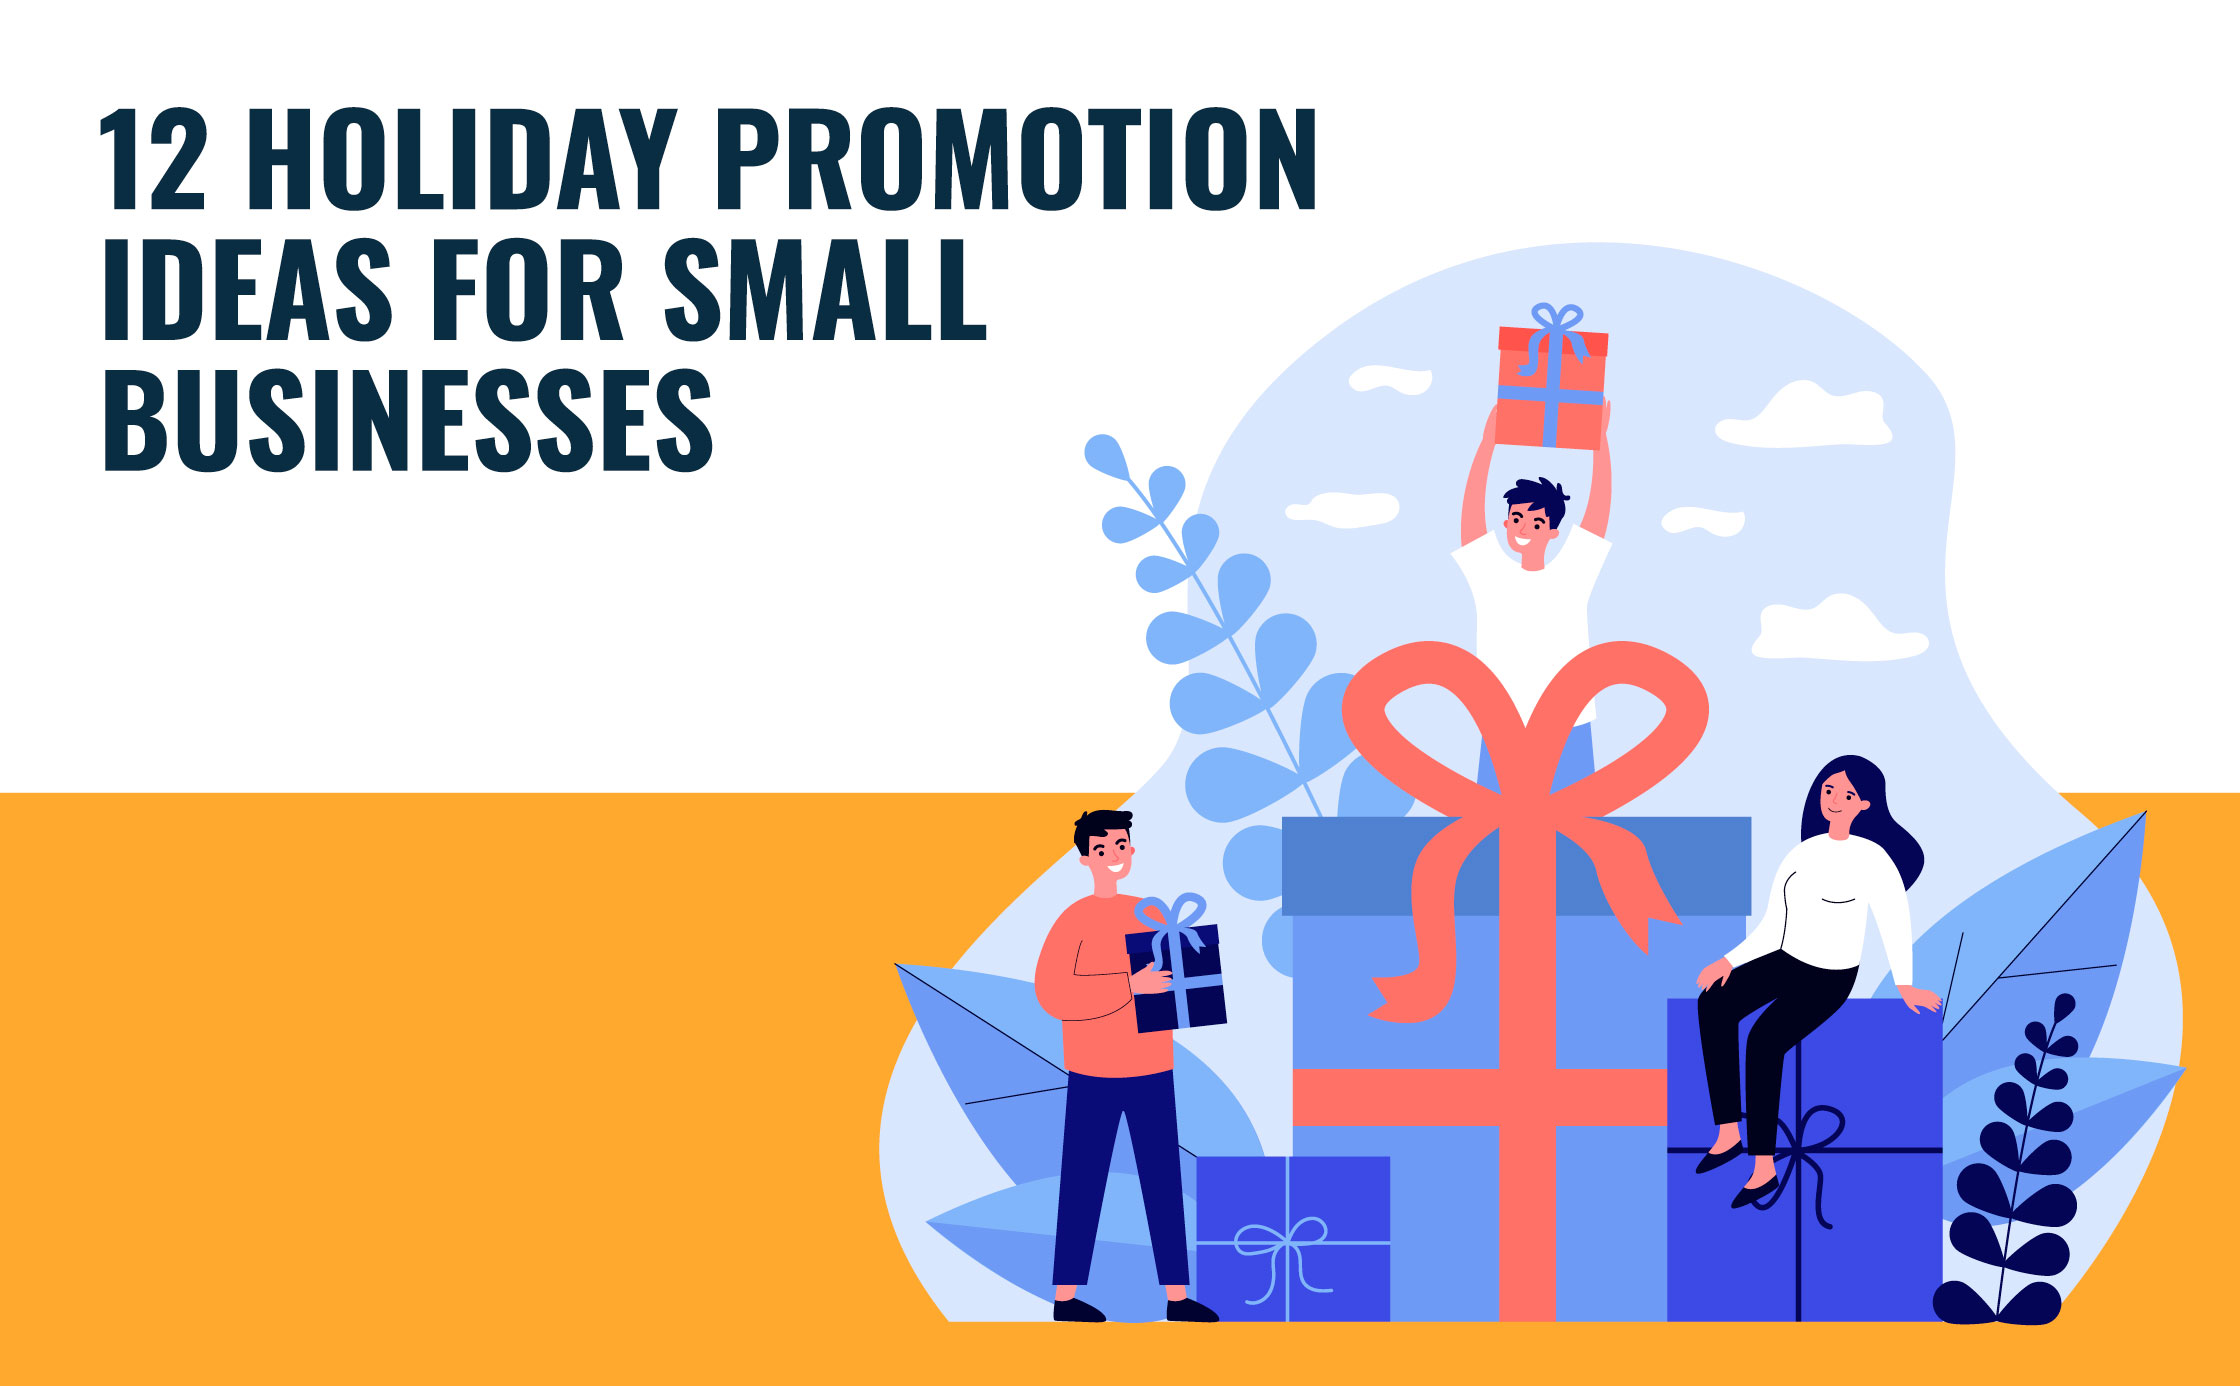 12 Holiday Promotion Ideas for Small Businesses